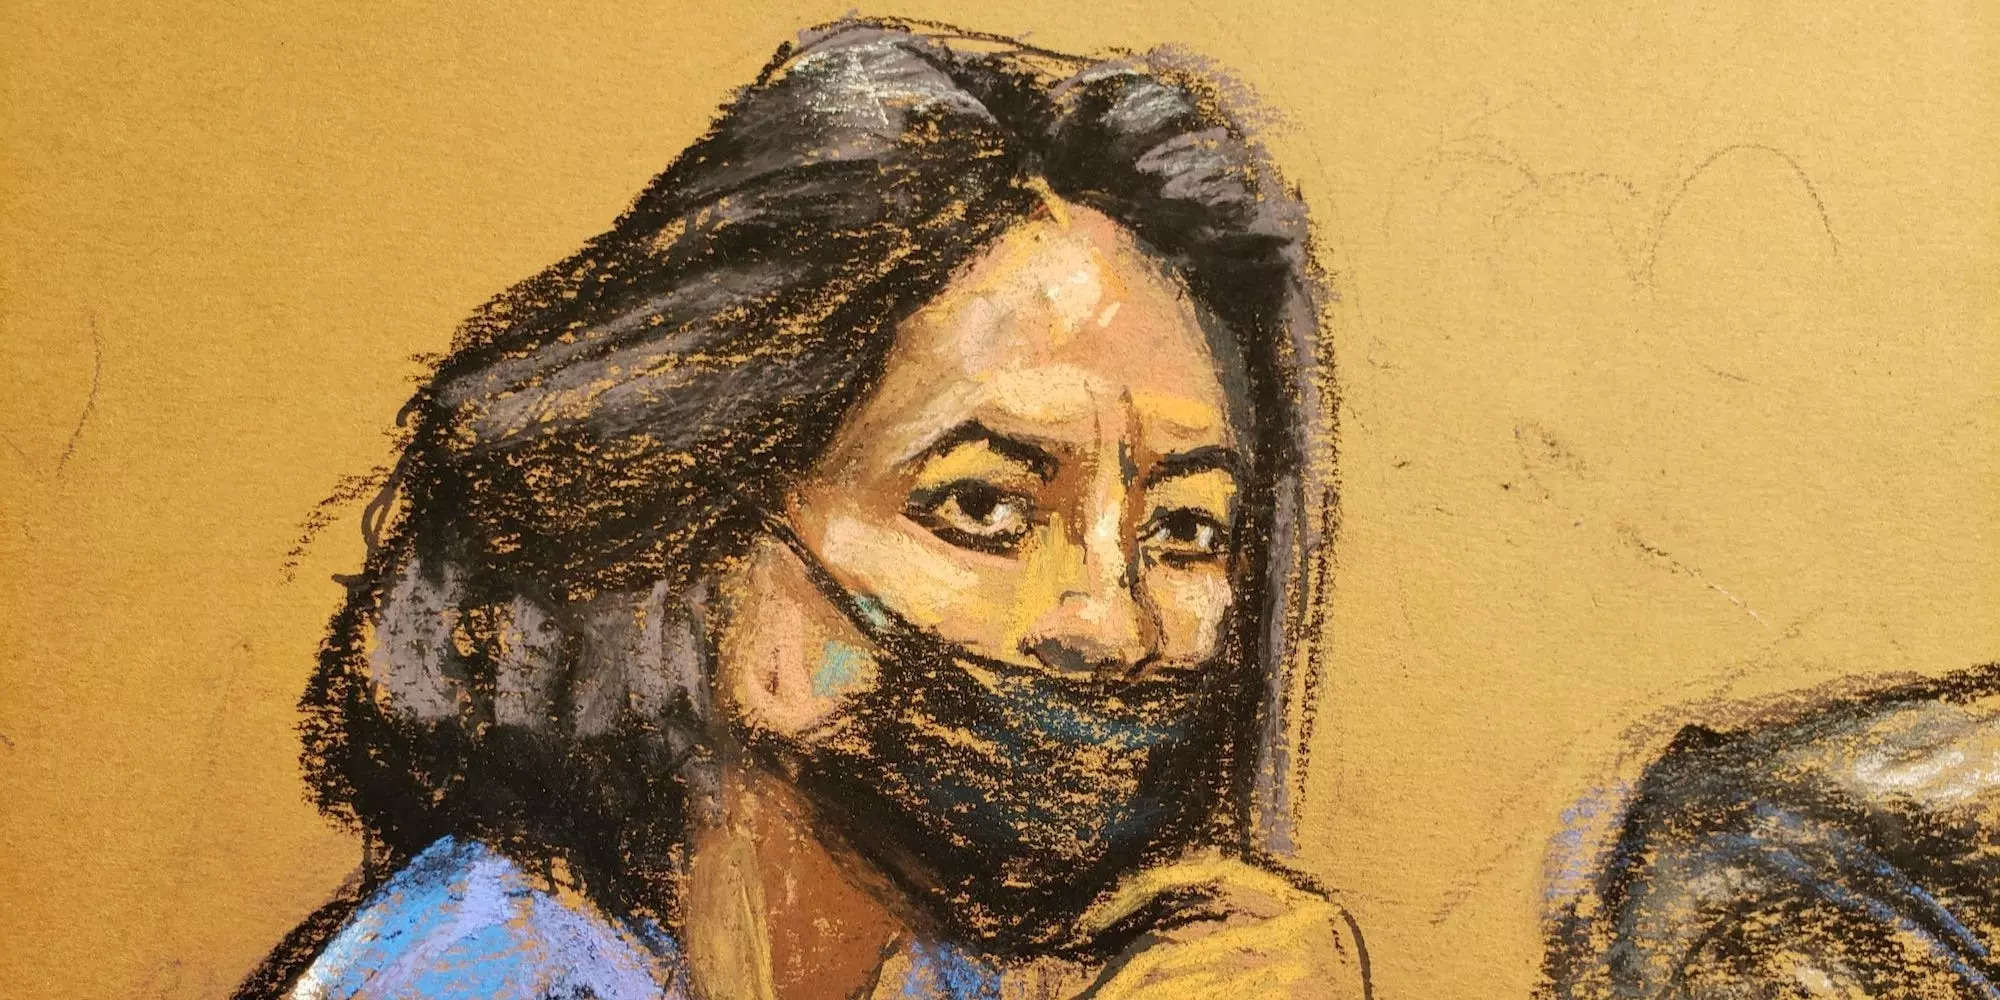 A courtroom sketch of Ghislaine Maxwell from November 2021. She is wearing a blue top and a black mask.